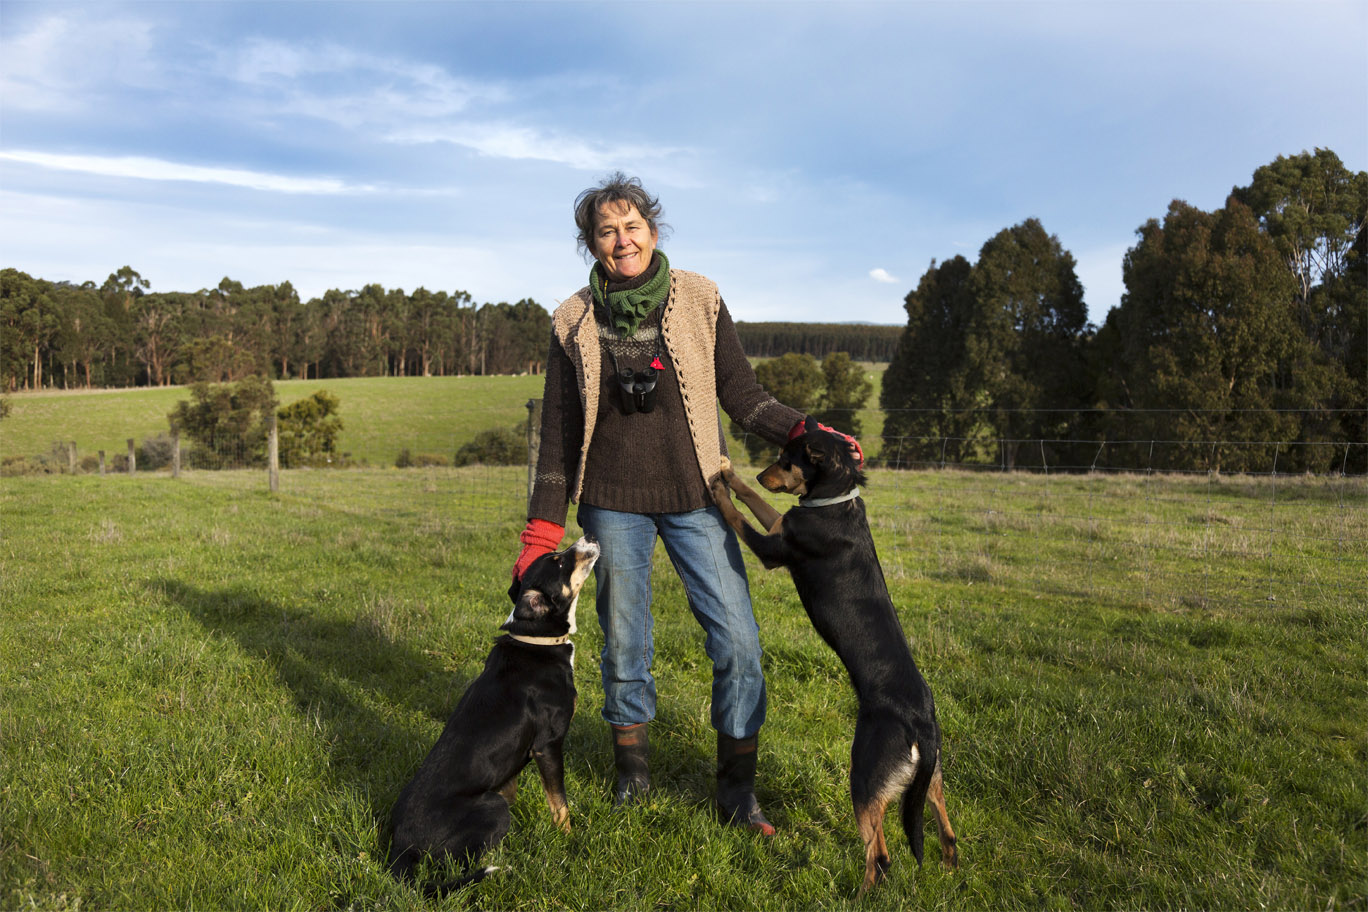 Farmer Jill Stewart in Deans Marsh, Australia relies on her dogs to help herd sheep. Her farm depends on her dogs being healthy and active.